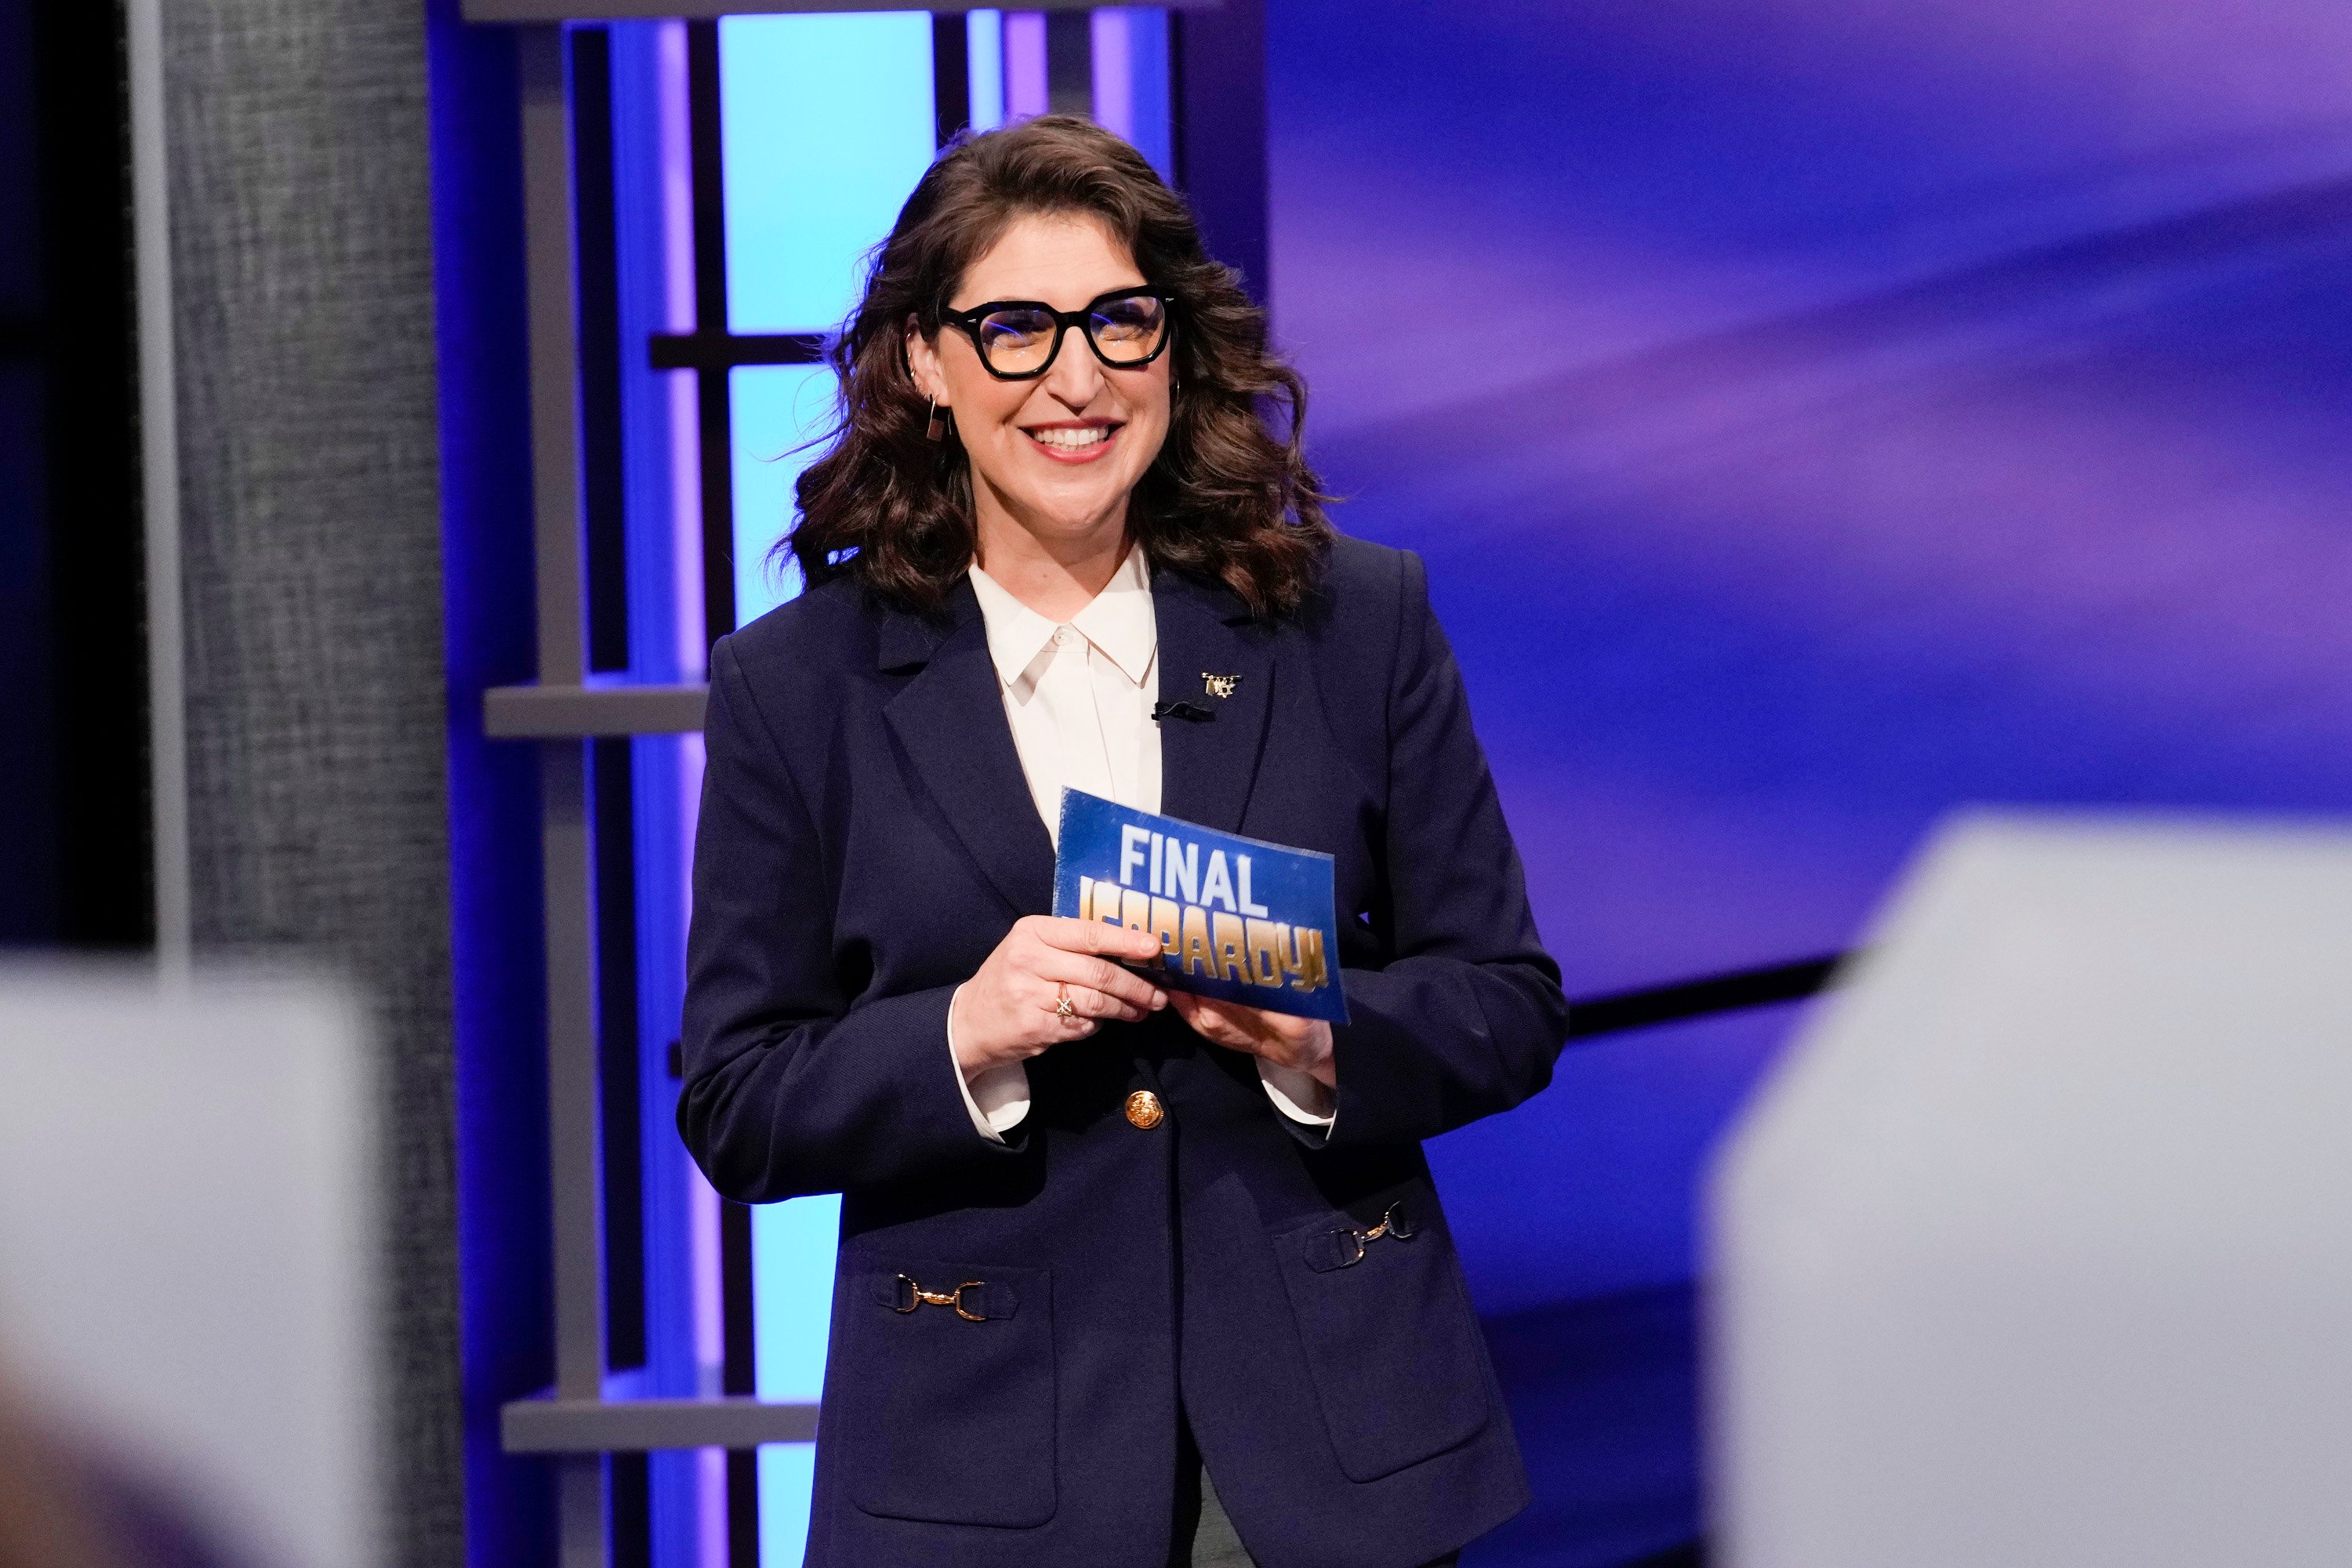 'Jeopardy! host Mayim Bialik holds a Final Jeopardy clue card in her hand on the game show's set.